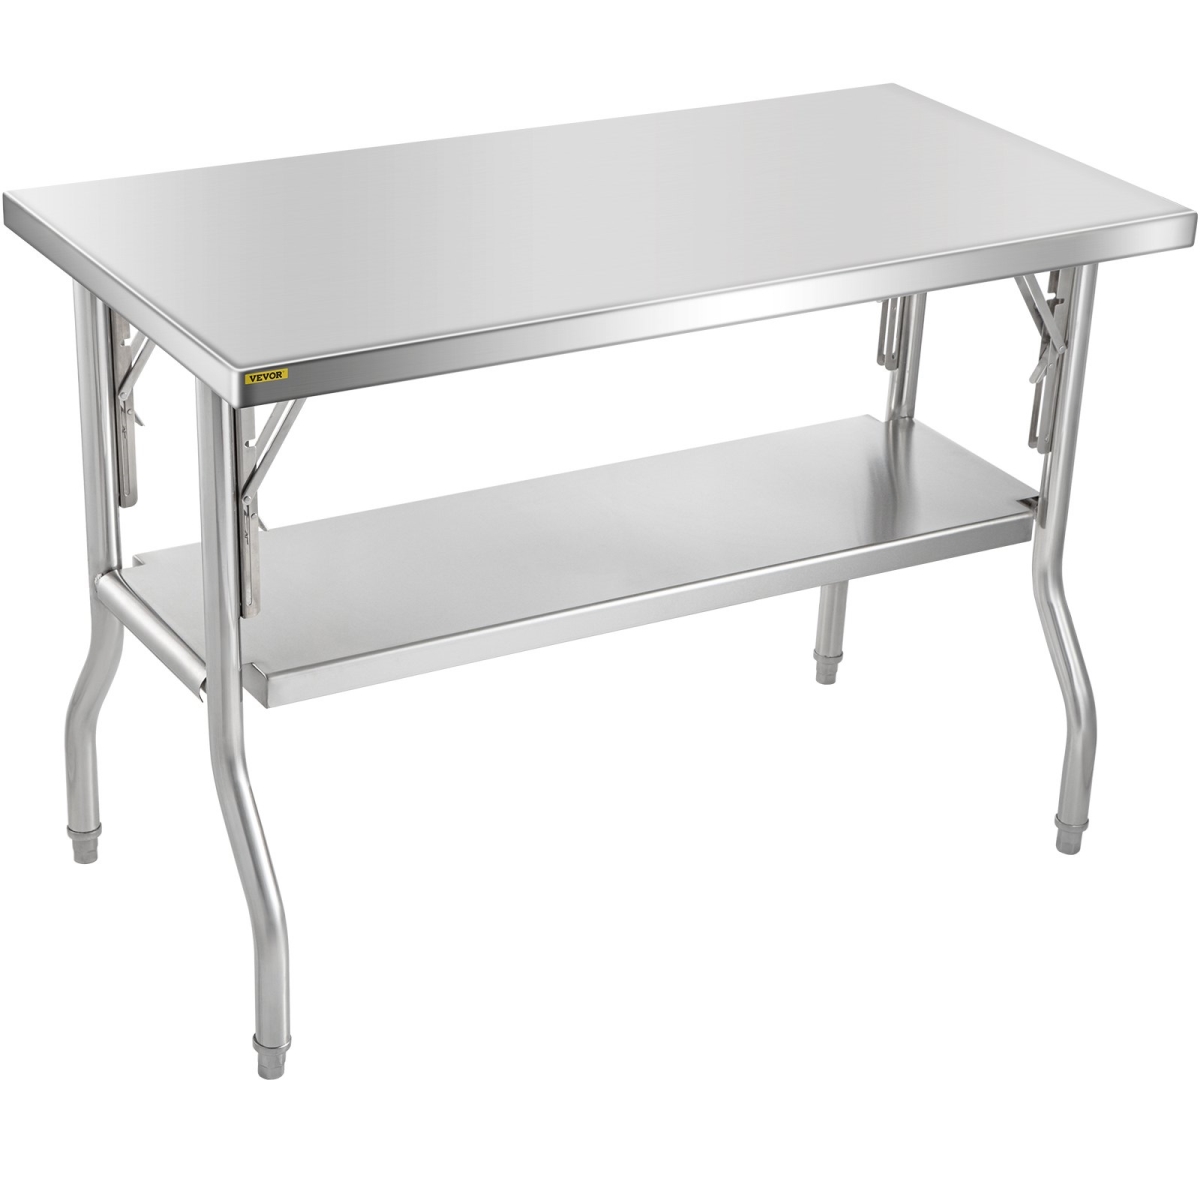 Picture of Vevor CFGZT48X24YC00001V0 48 x 24 in. Folding Commercial Prep Table